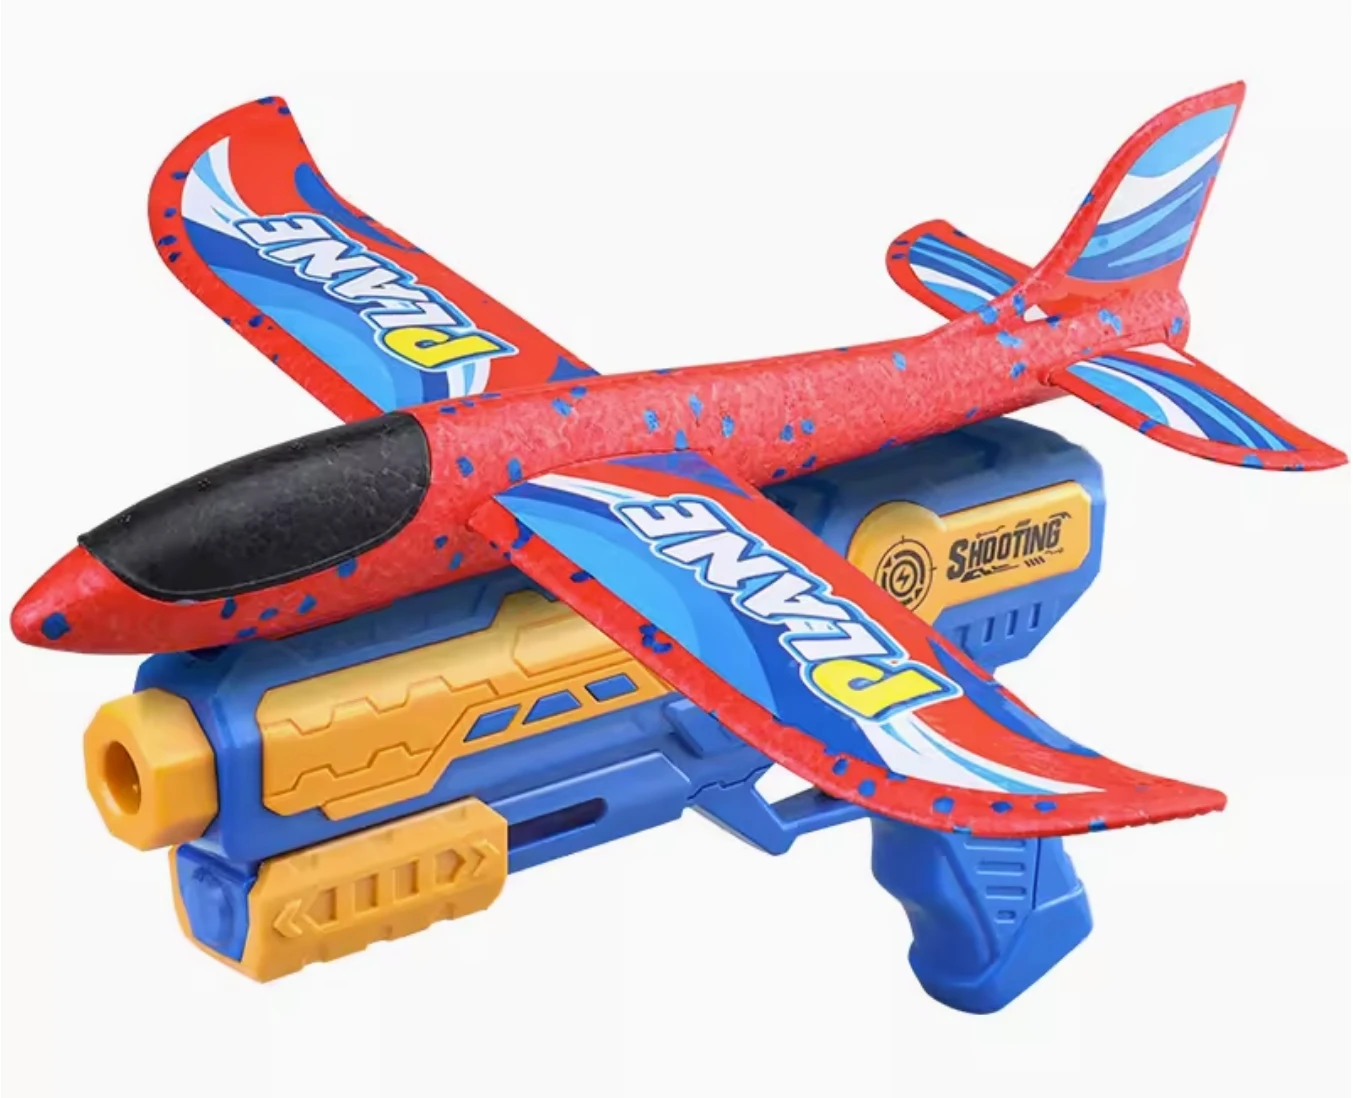 

Foam Airplane Launcher Toys 2 Flight mode Glider Plane Outdoor Sport Flying Toys for Kids Gifts Birthday Gift for Boys Girls